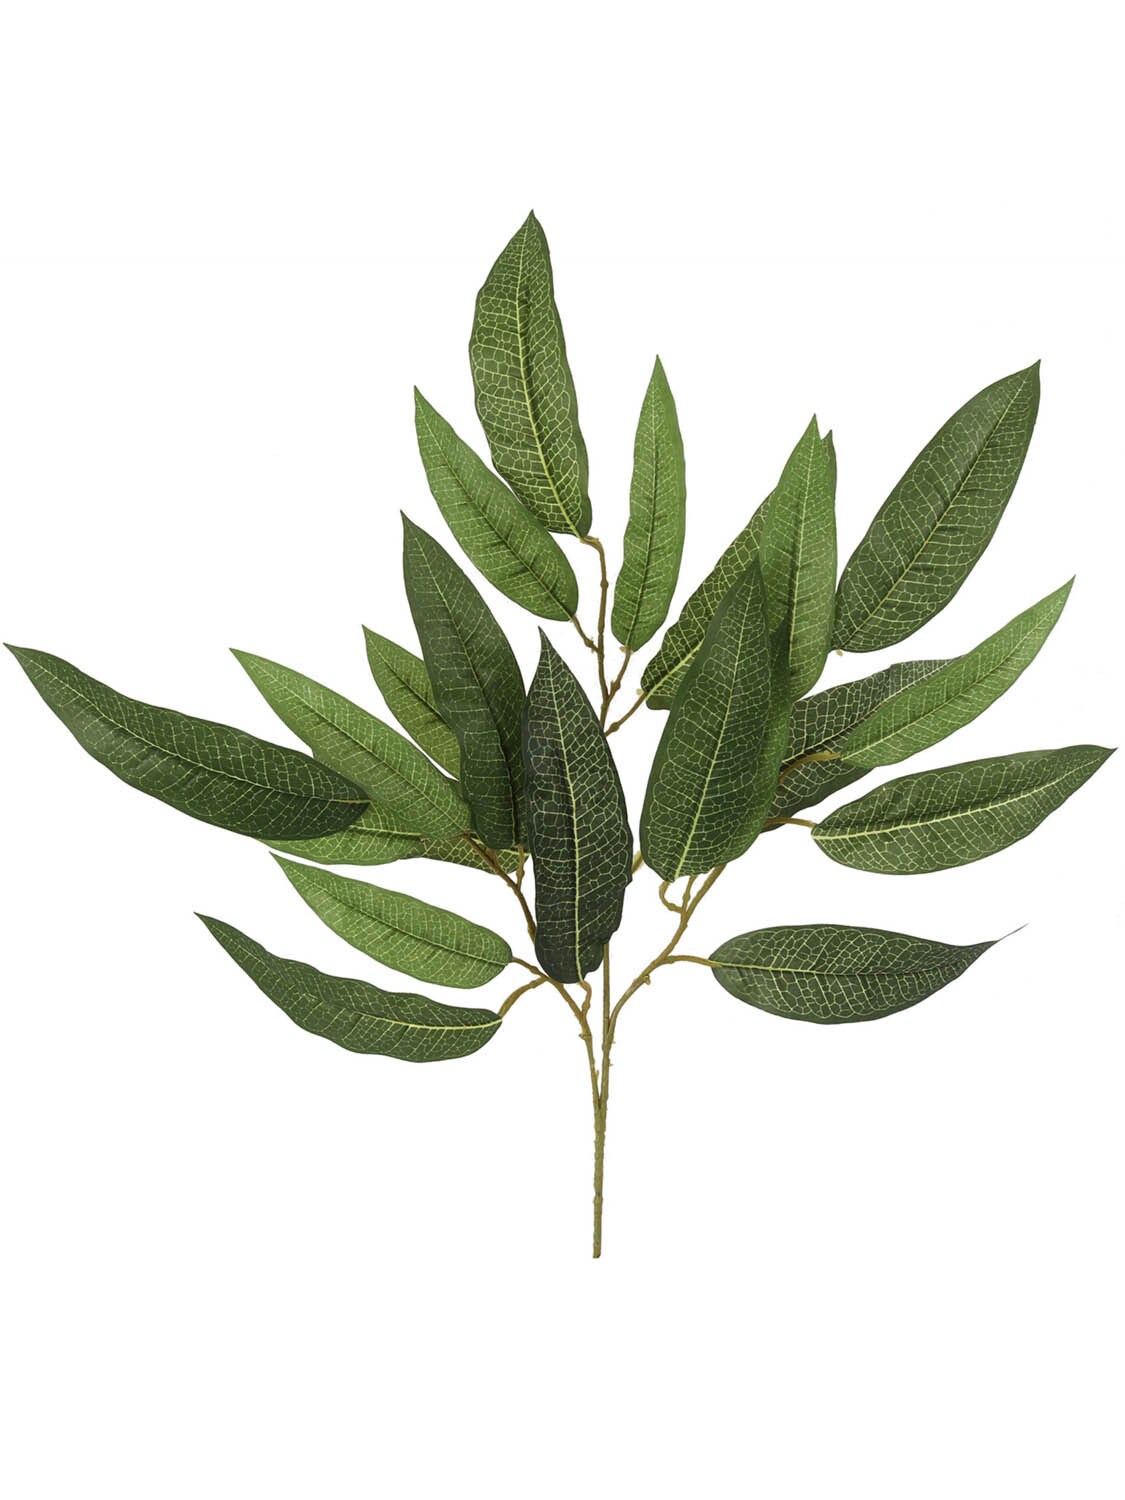 21&#x22; Exquisite Mango Leaf Spray Set of 48 - Lush Artificial Foliage for Home D&#xE9;cor and Crafts - Lifelike Mango Leaves